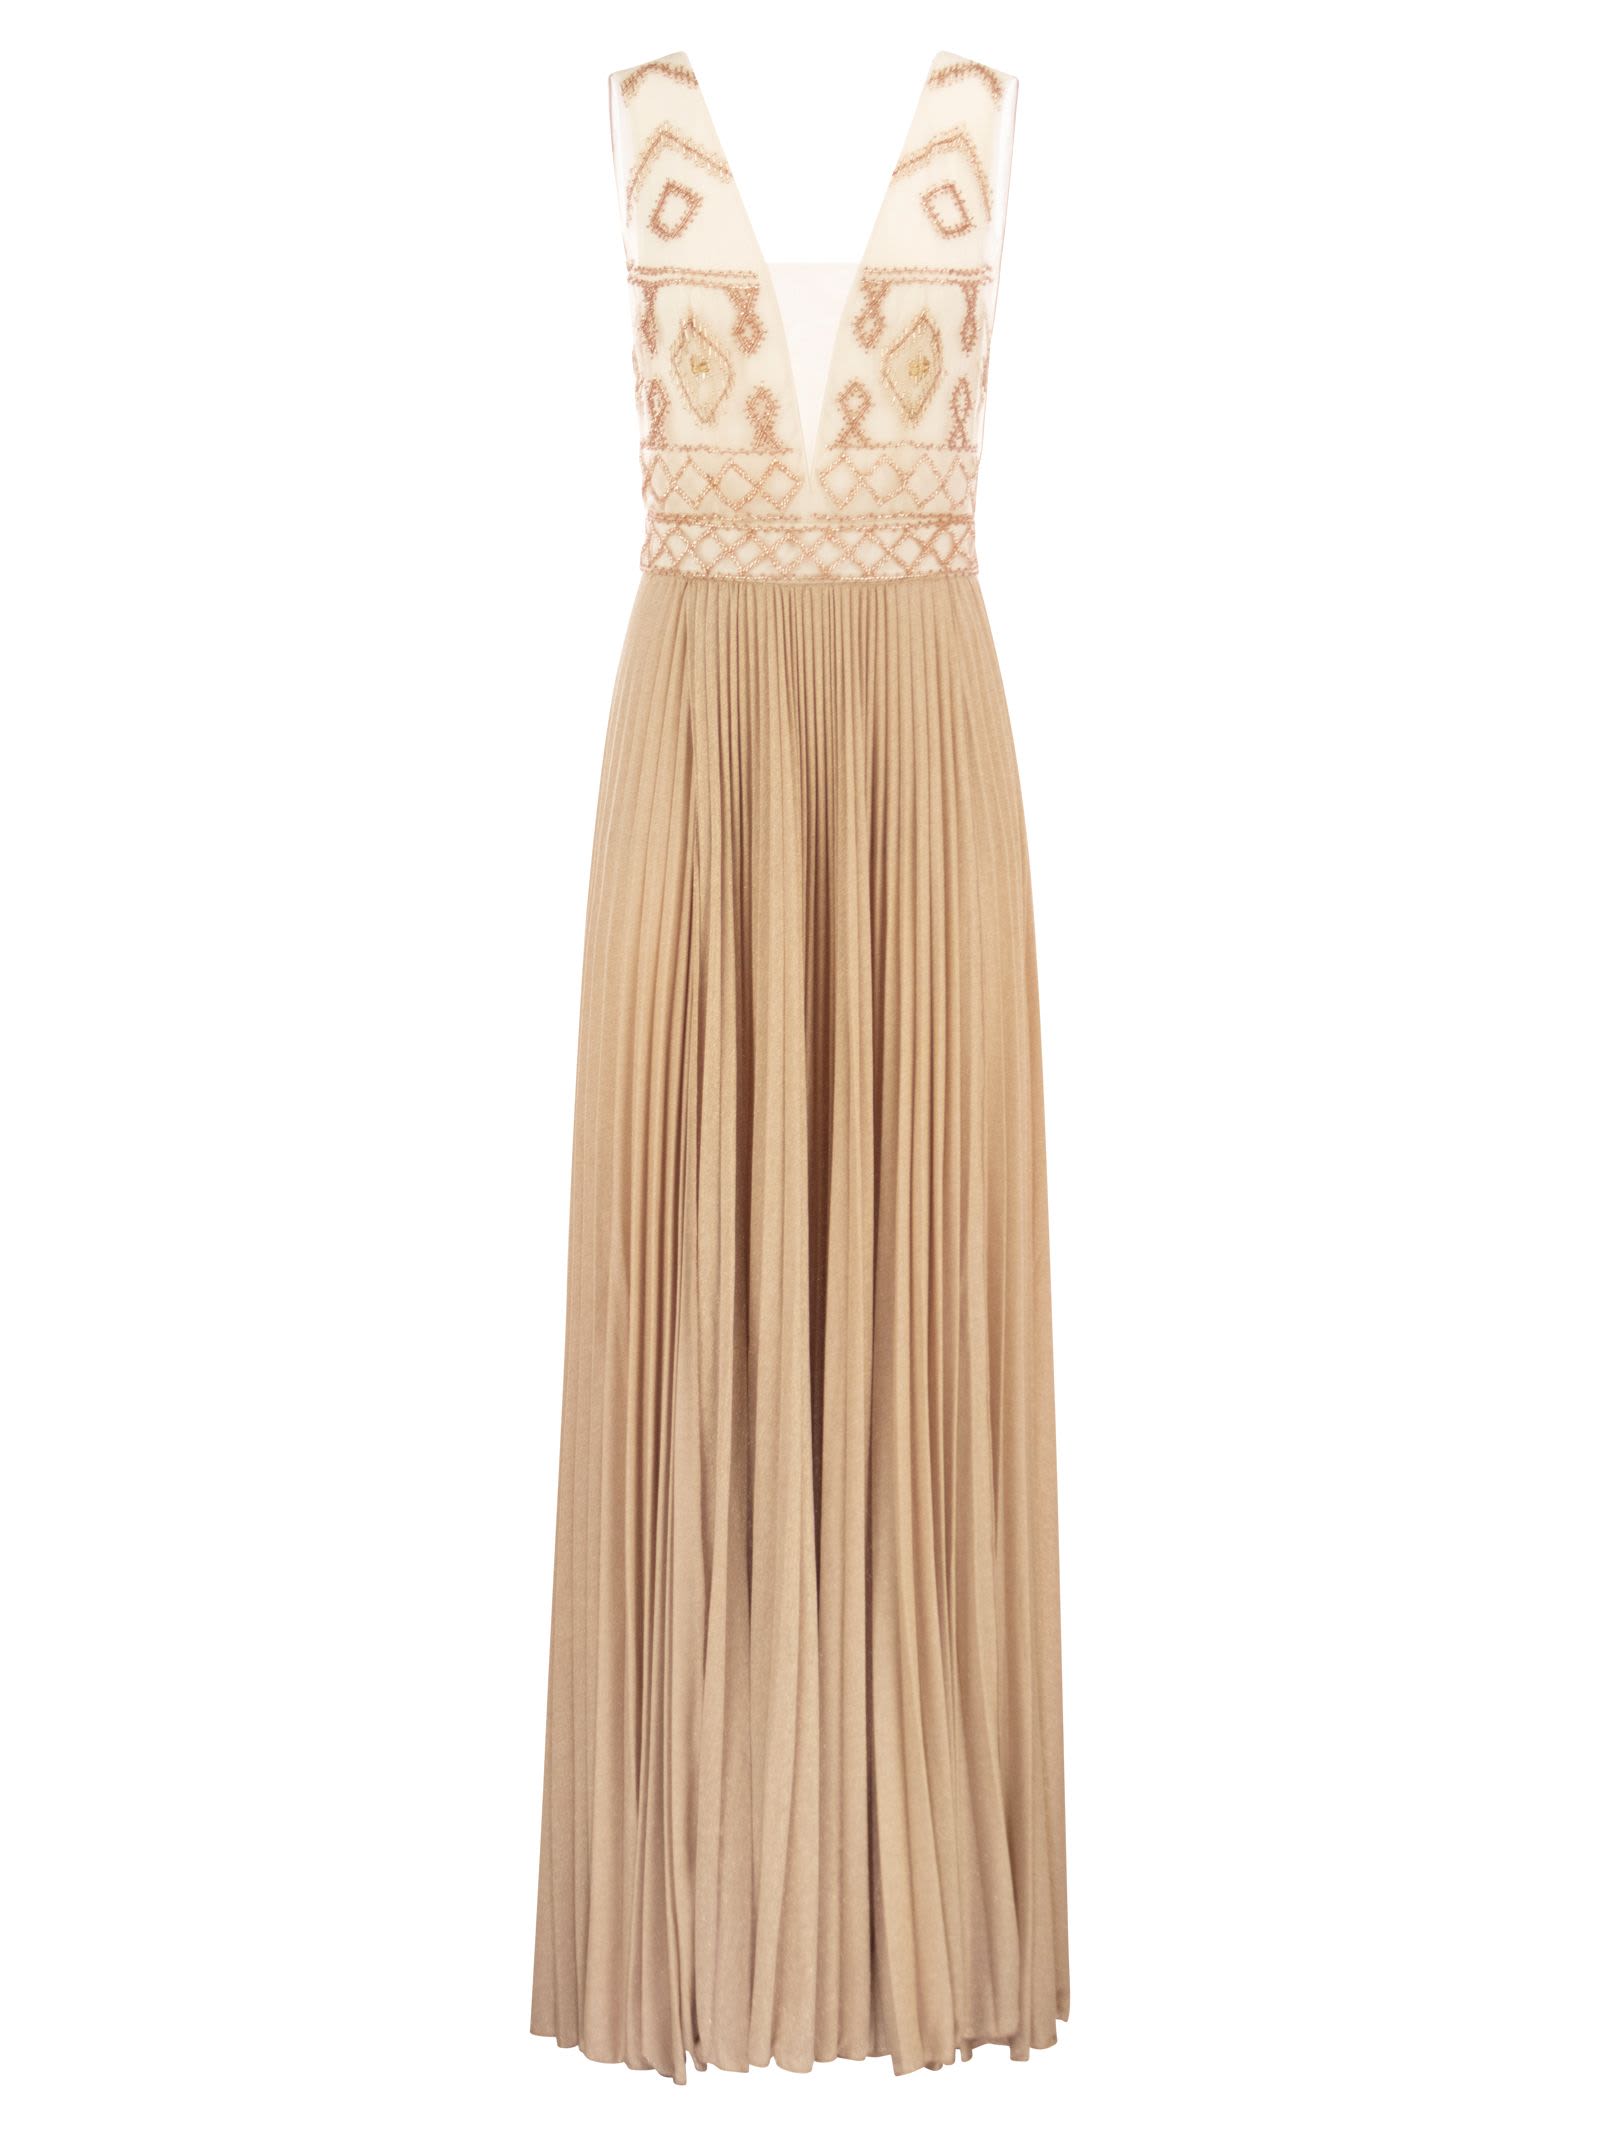 Elisabetta Franchi Red Carpet Dress With Rhombus Embroidery